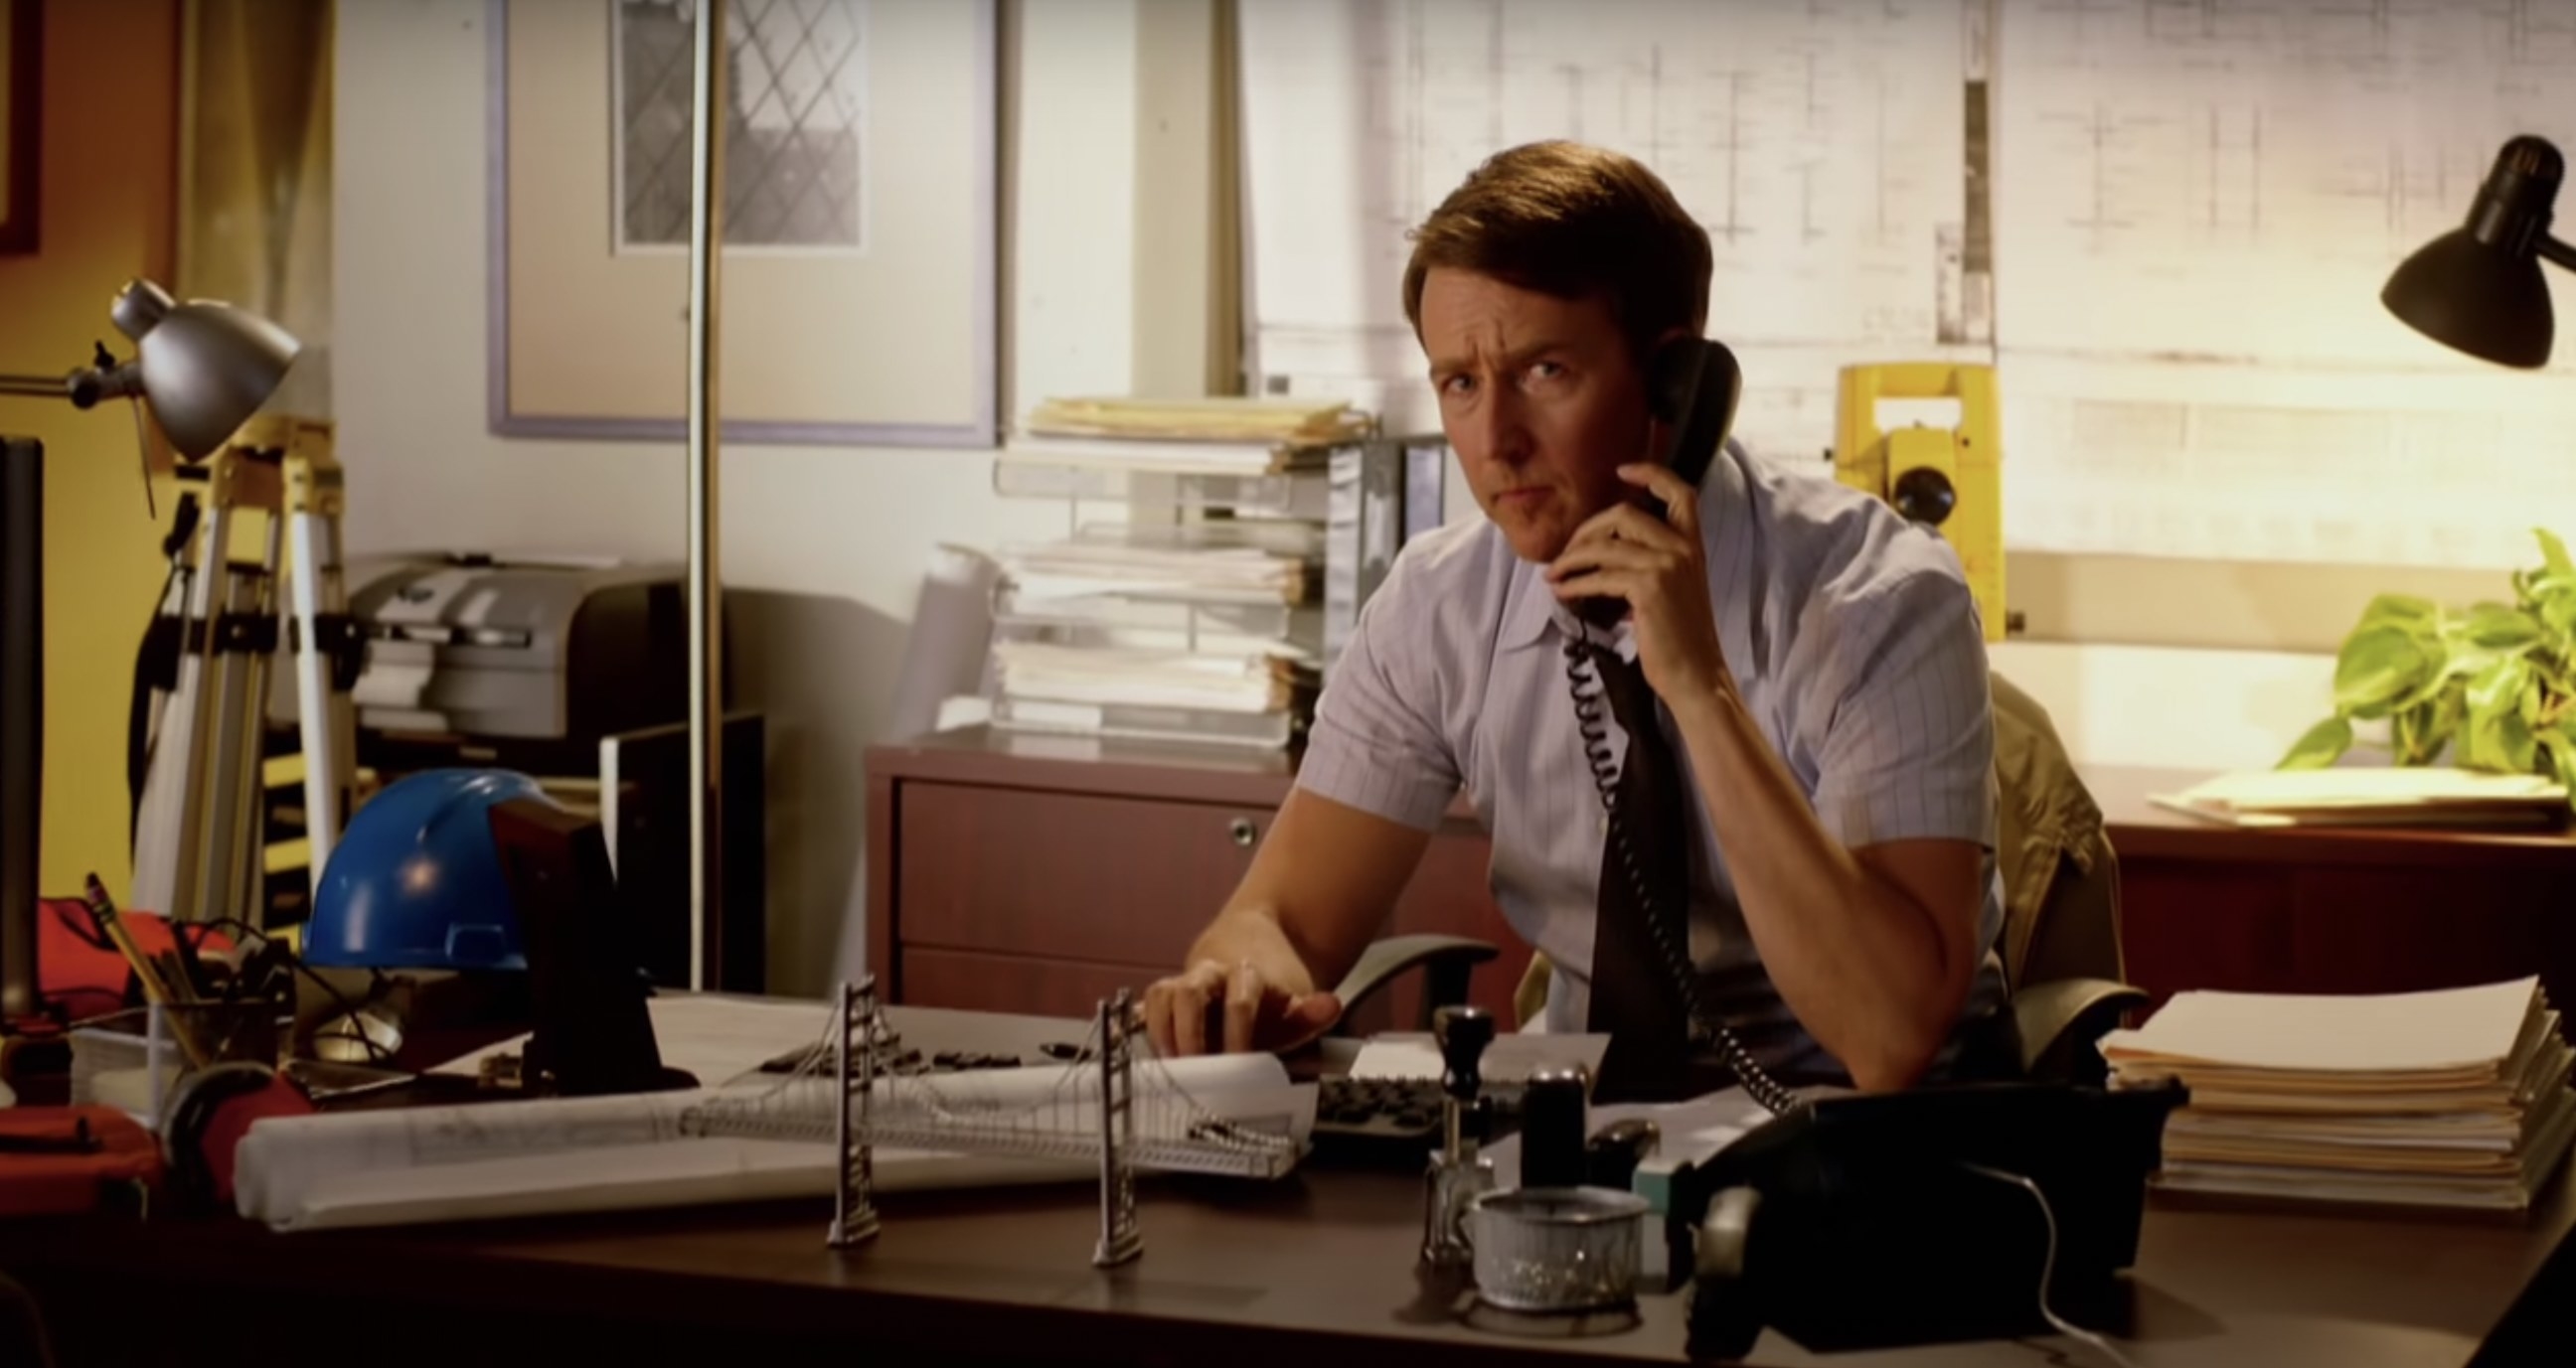 Edward Norton sitting at a desk on the phone, looking at the camera